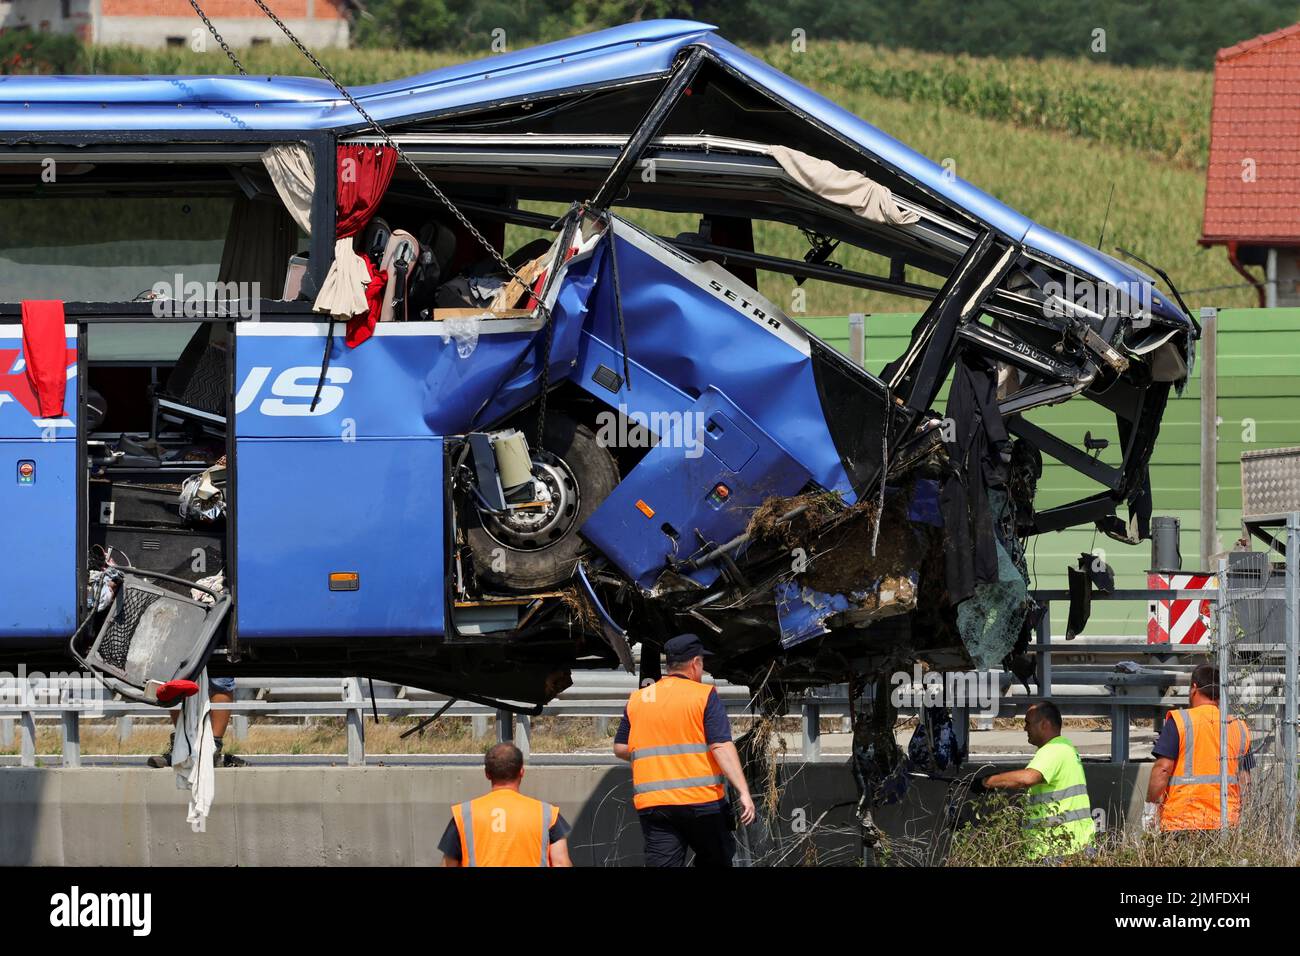 Rescuers work as a crane removes the bus with Polish licence plates that slipped off a road, from the scene near Varazdin, northwestern Croatia, August 6, 2022. REUTERS/Antonio Bronic Stock Photo